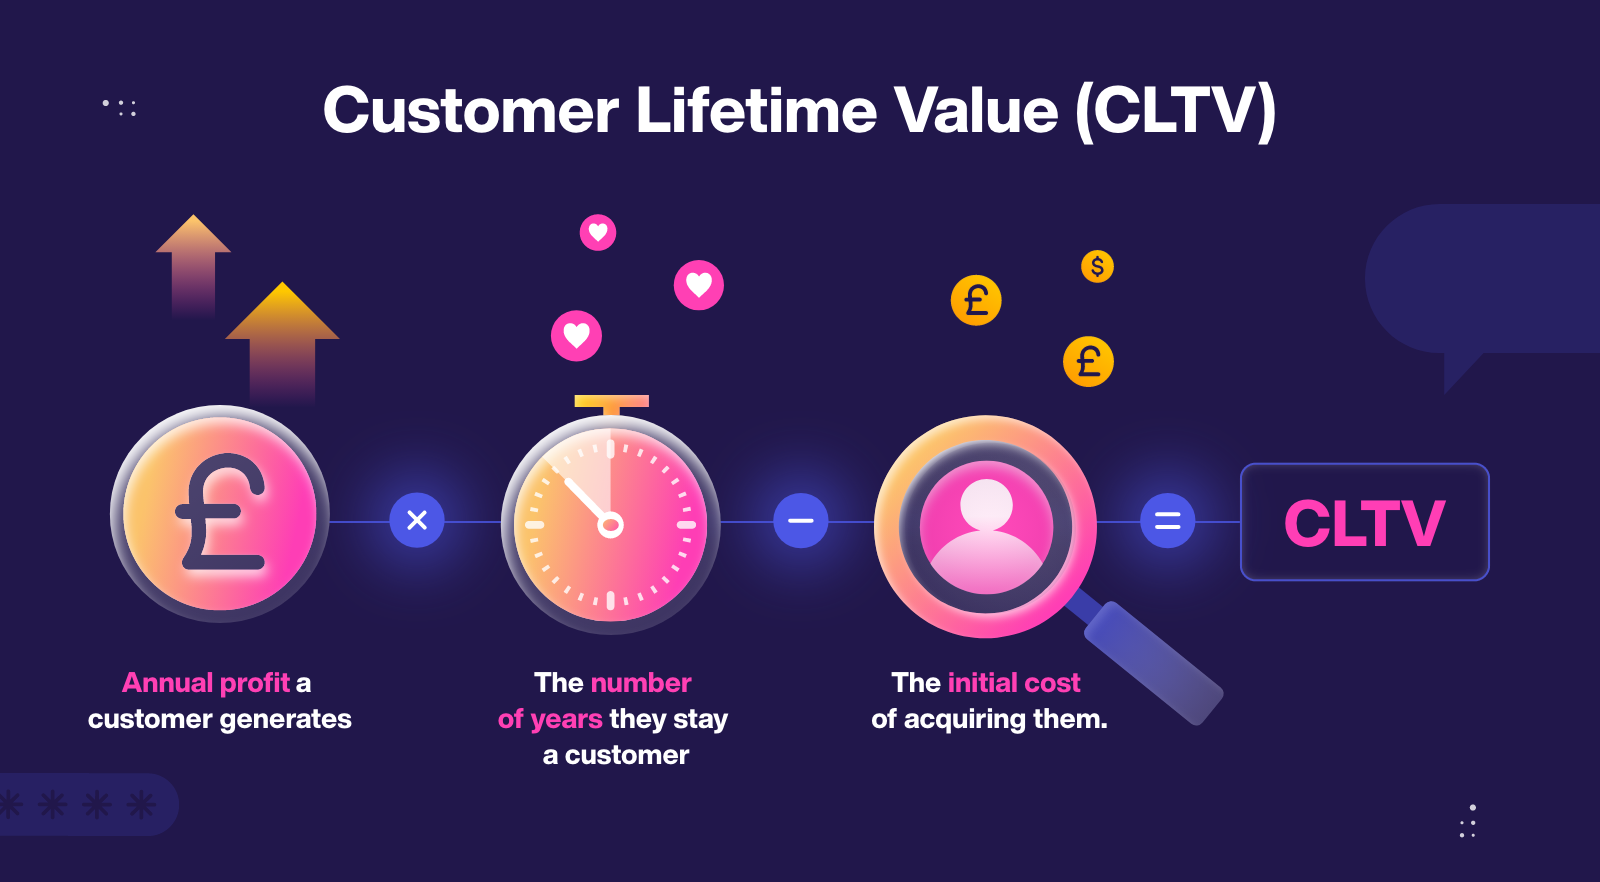 How to calculate Customer Lifetime Value (CLTV) 